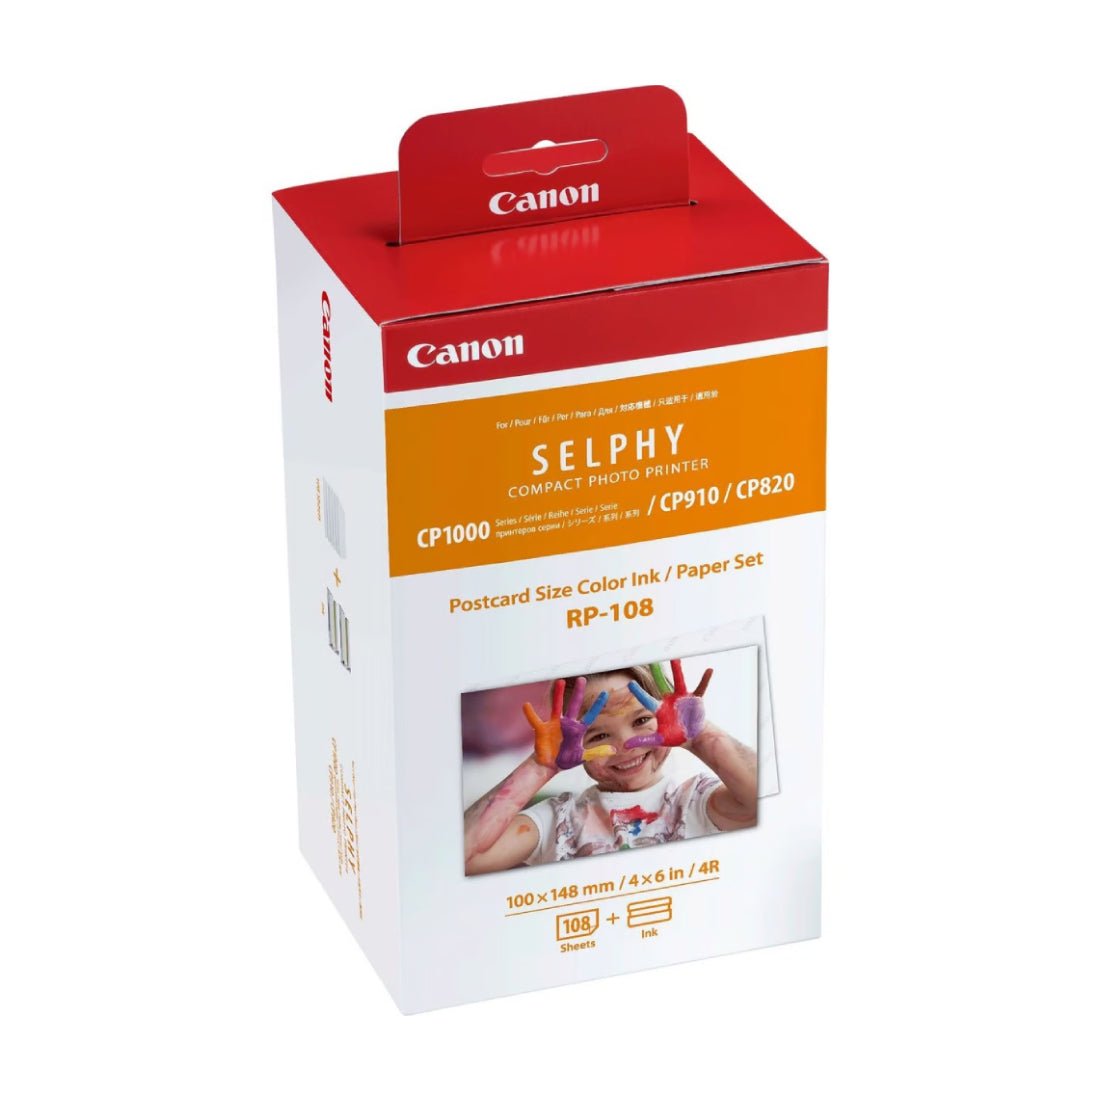 Canon RP-108 High-Capacity Color Ink/Paper Set - اكسسوار طابعة - Store 974 | ستور ٩٧٤